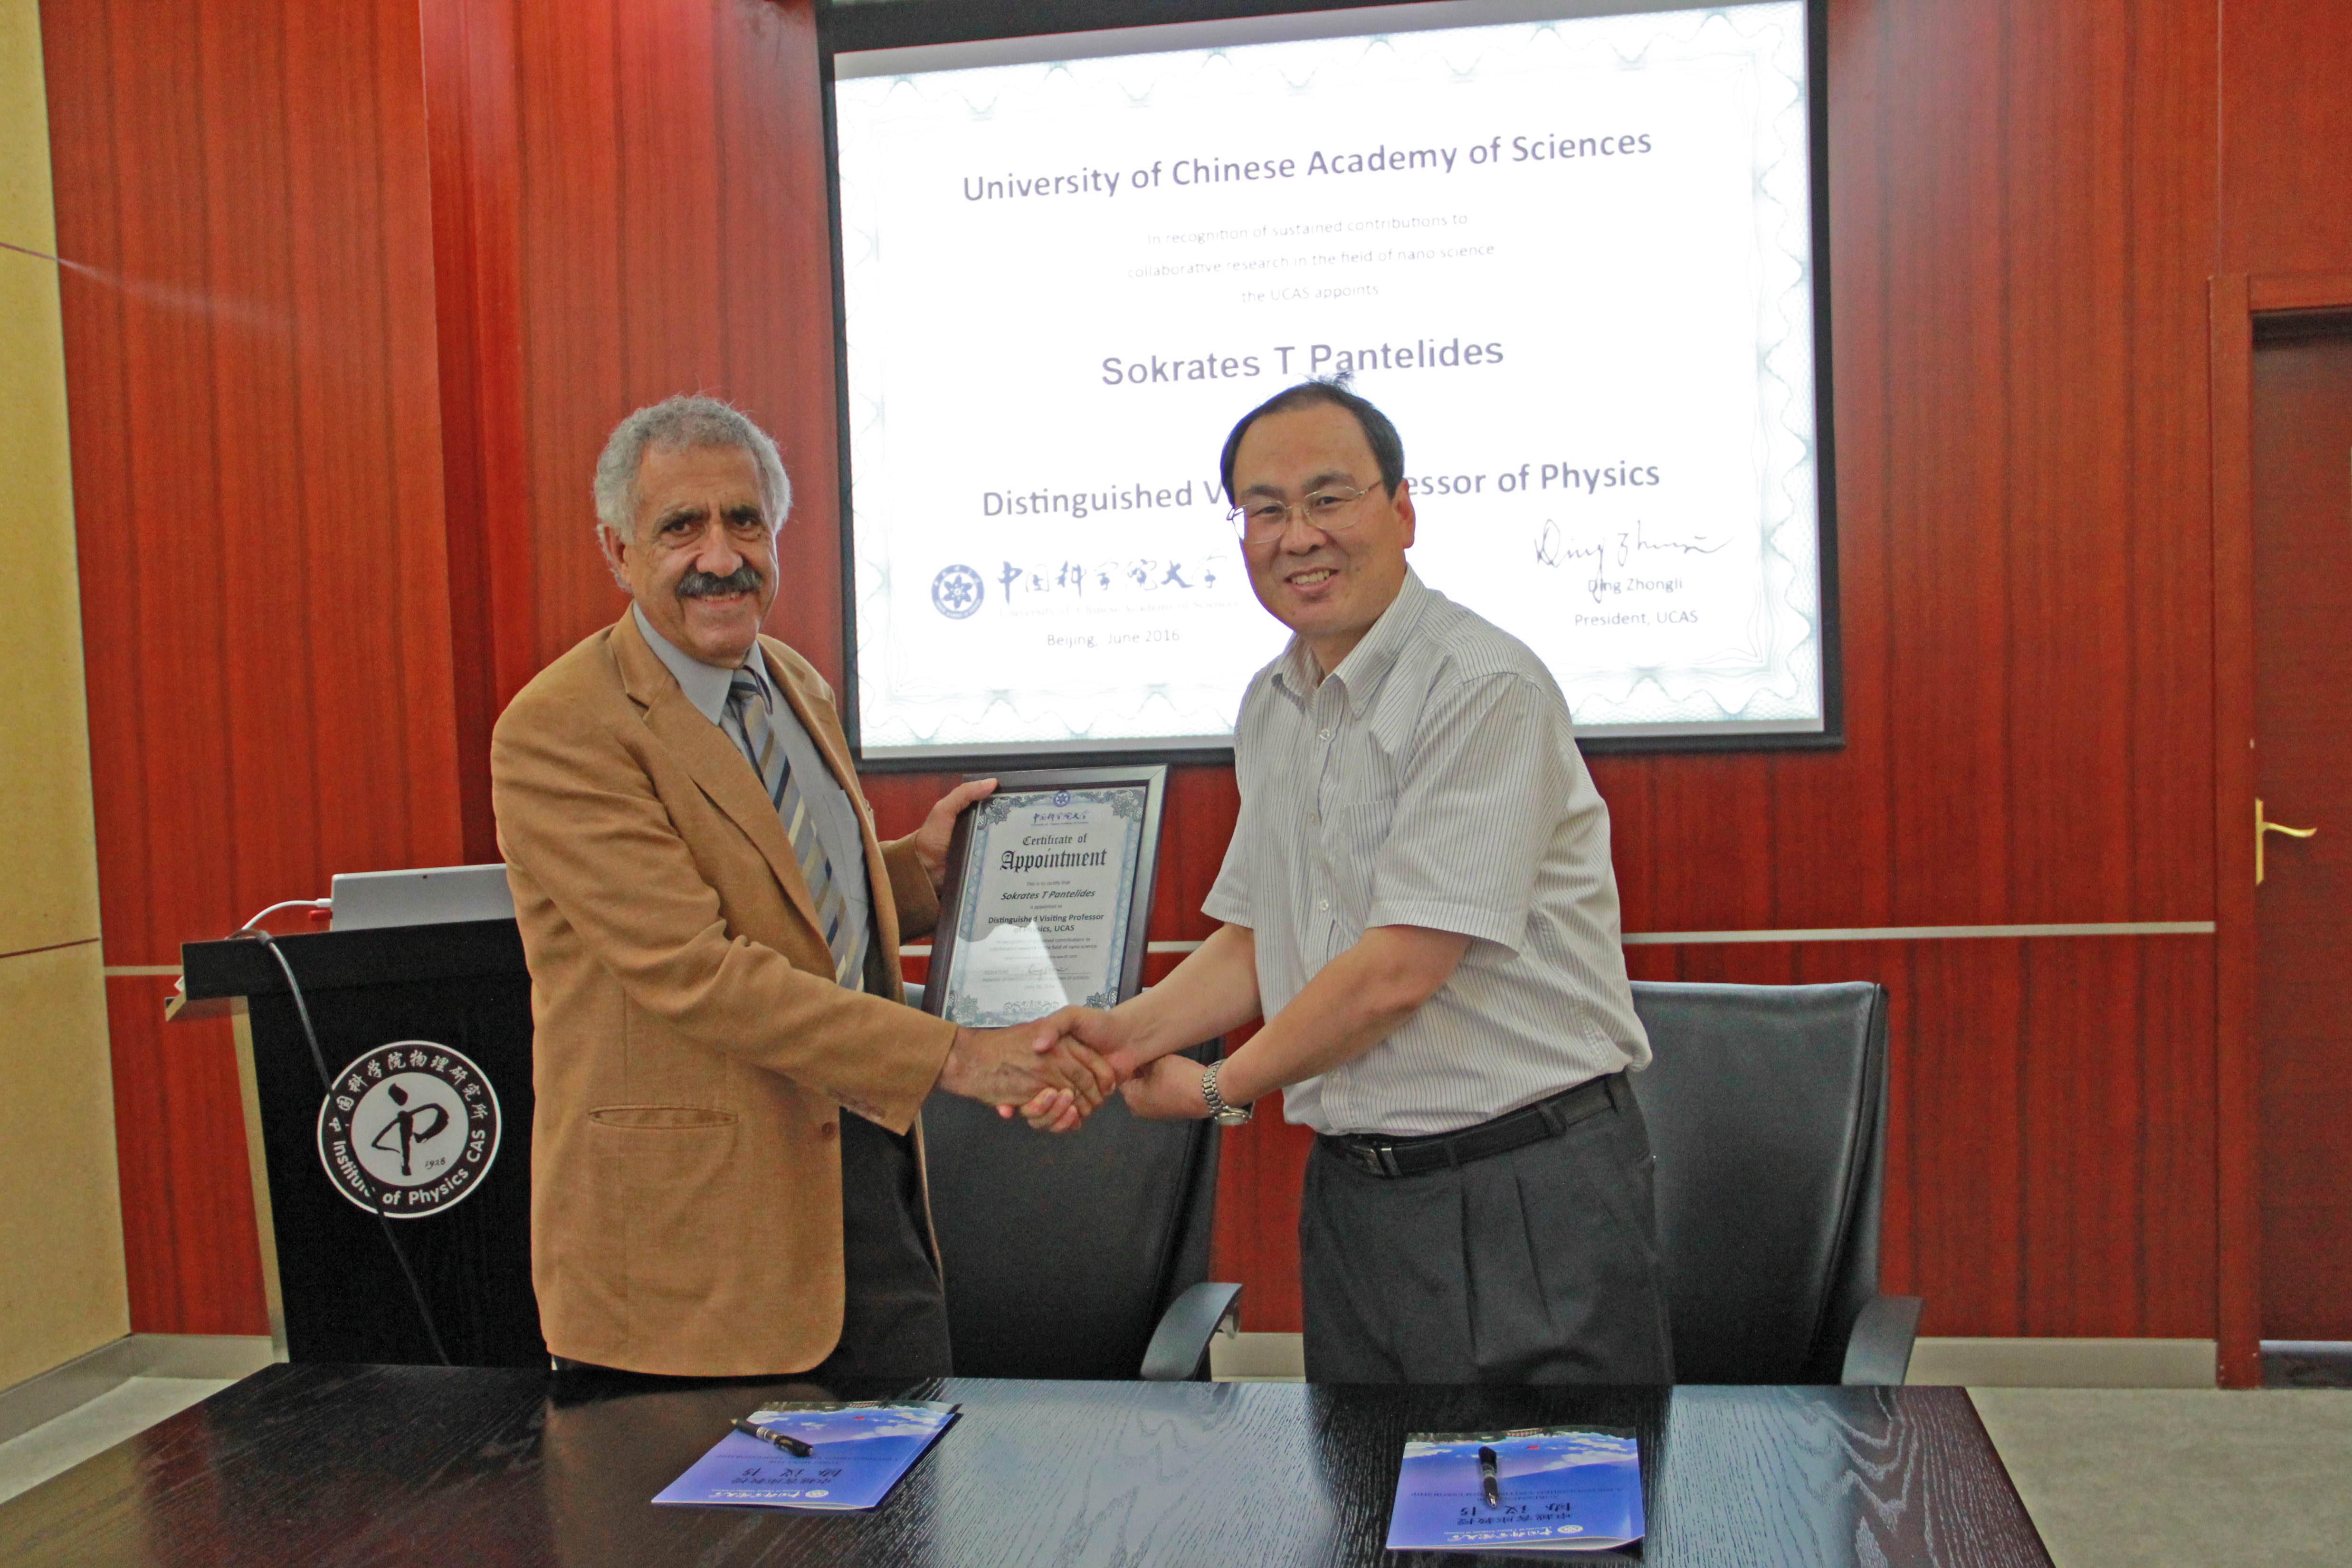 The University Vice President presenting the certificate of appointment.